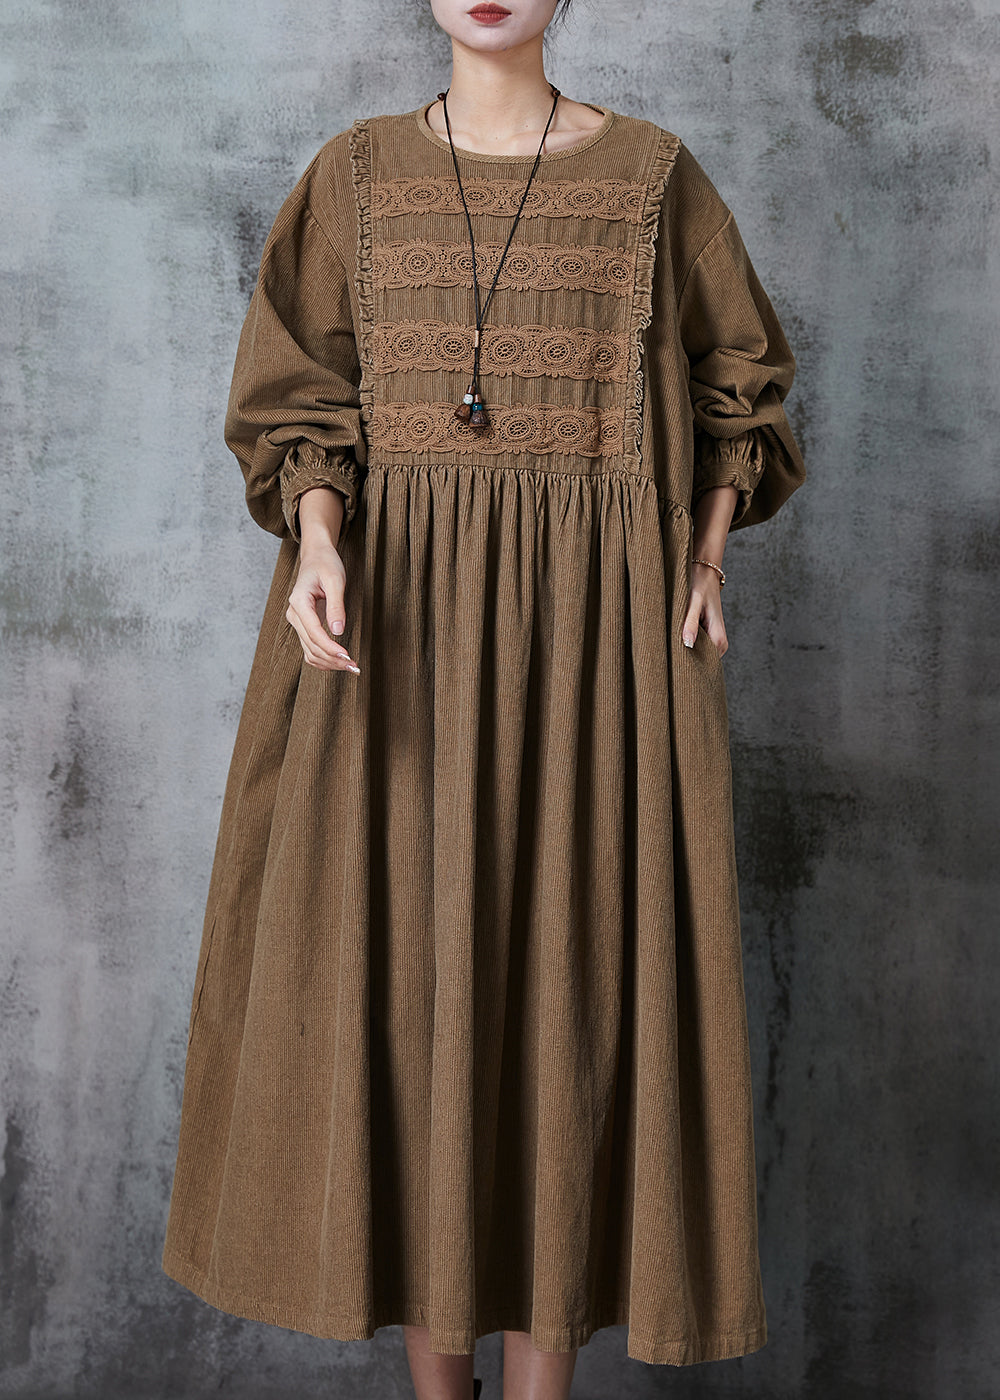 Chic Coffee Oversized Patchwork Lace Corduroy Long Dress Spring